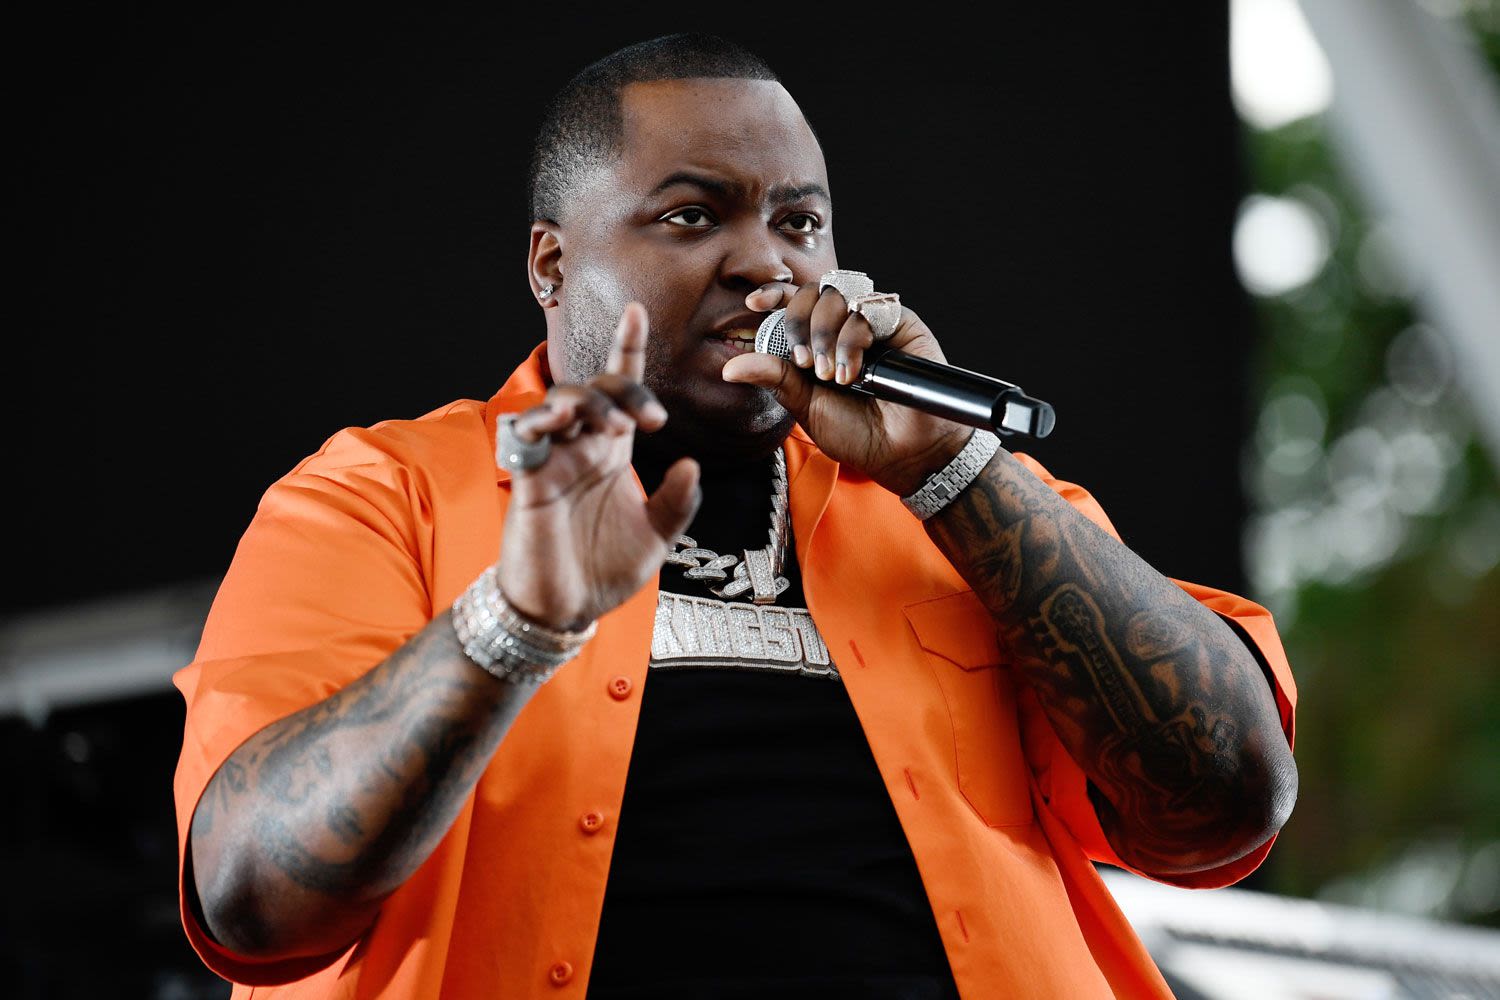 Sean Kingston Booked into Florida Jail and Being Held on $100K Bond Ahead of Hearing